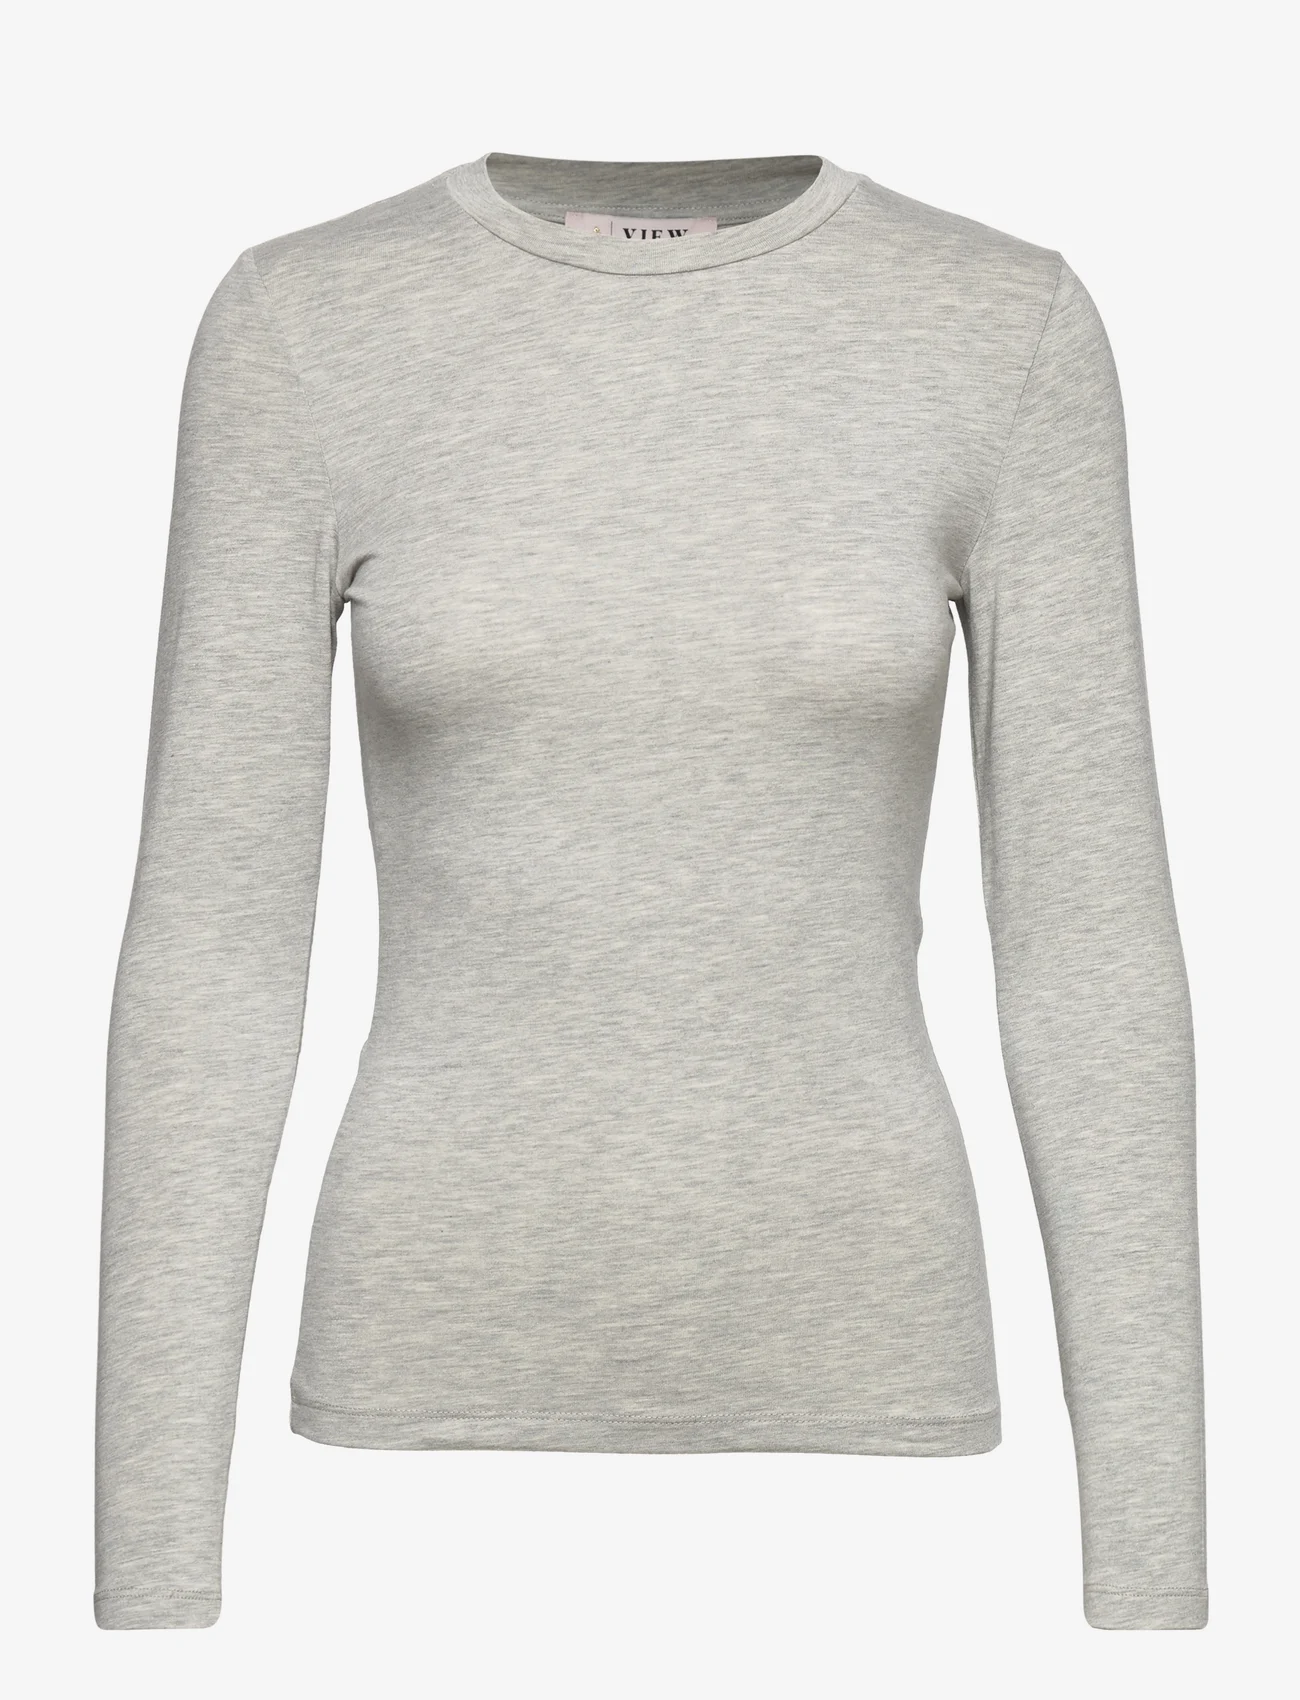 A-View - Stabil top l/s - long-sleeved tops - light grey melange - 0